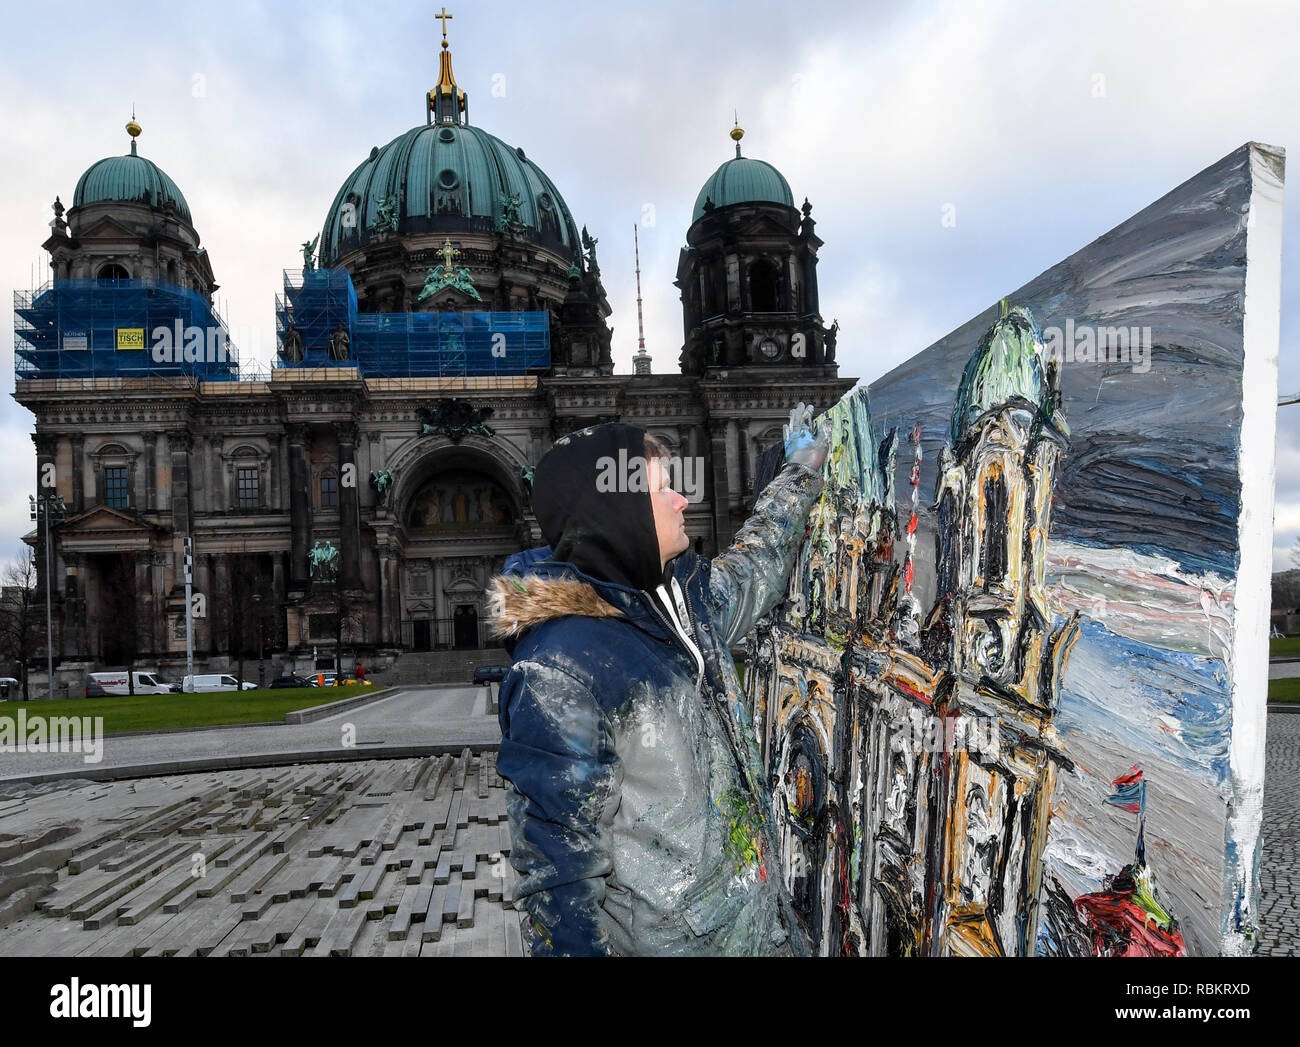 Berlin, Germany. 10th Jan, 2019. The painter Christopher Lehmpfuhl paints a picture with the Berlin Cathedral in the Lustgarten. The artist is known for painting large-format, color-intensive pictures in public or outdoors. He uses his fingers to apply the paint. Credit: Jens Kalaene/dpa-Zentralbild/ZB/dpa/Alamy Live News Stock Photo